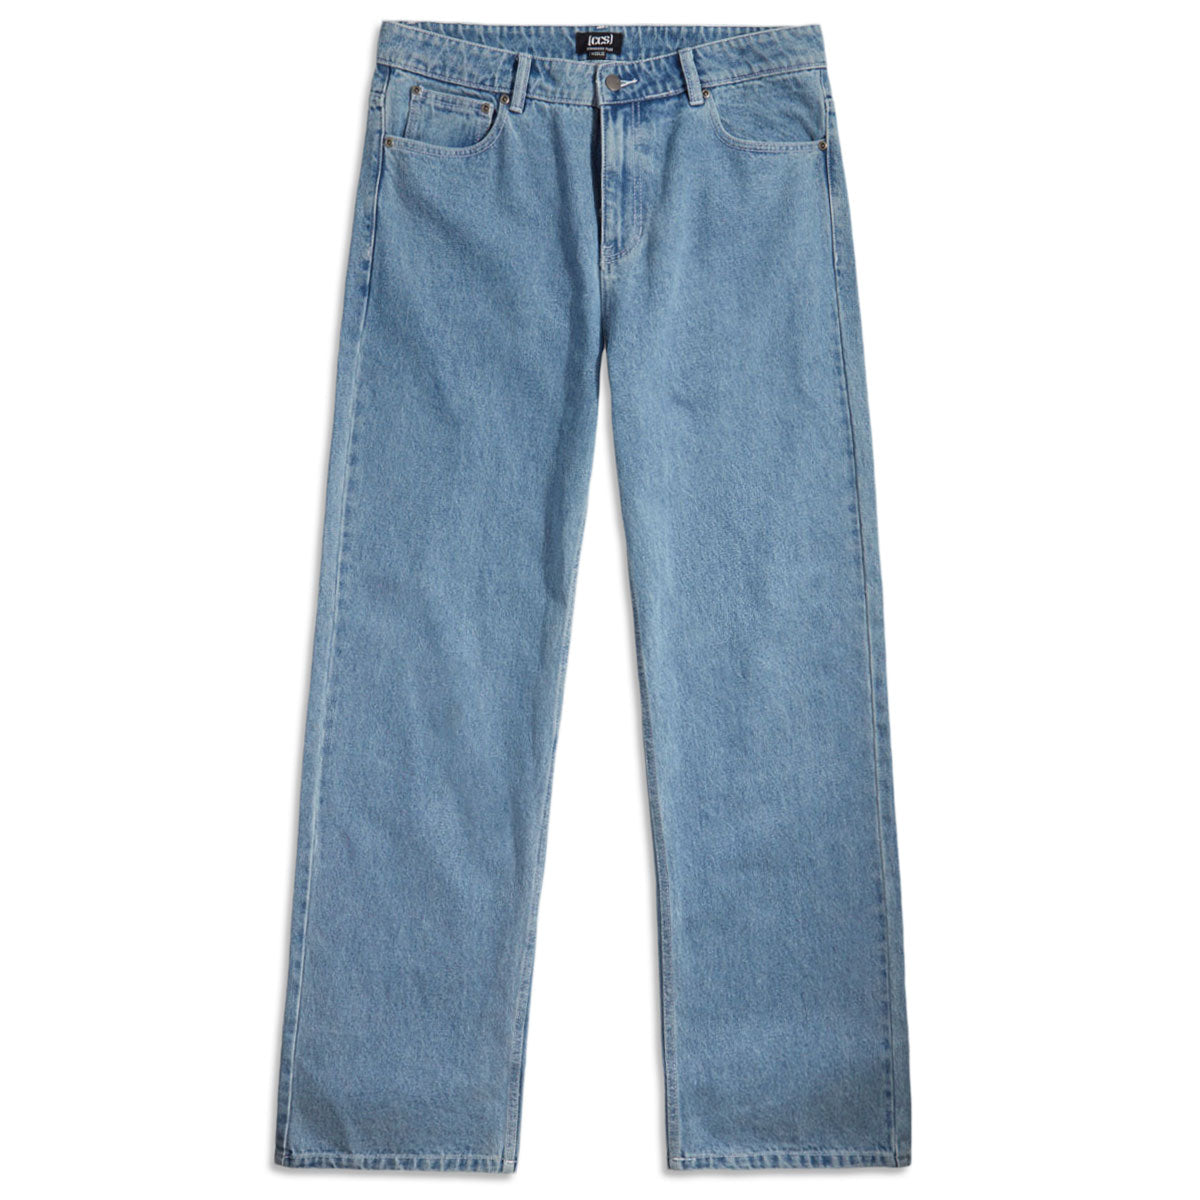 CCS Original Relaxed Denim Jeans - Rinsed Blue